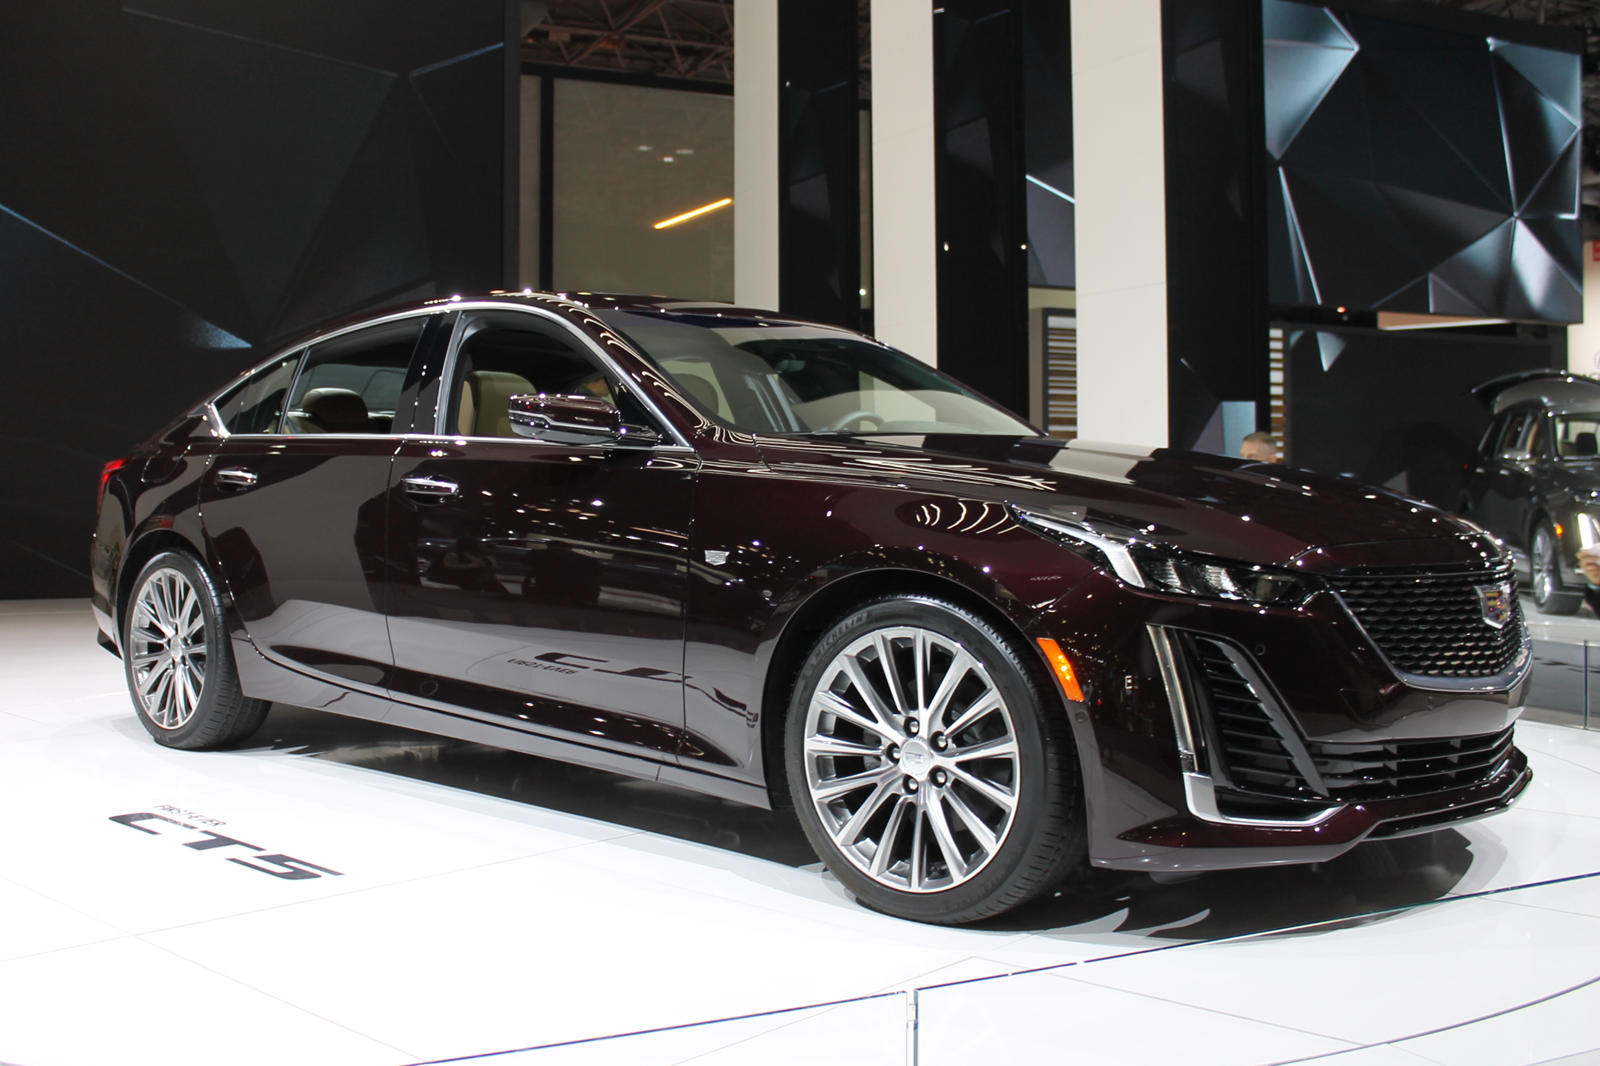 2020 Cadillac CT5 Is A Killer Deal Compared To CTS | CarBuzz